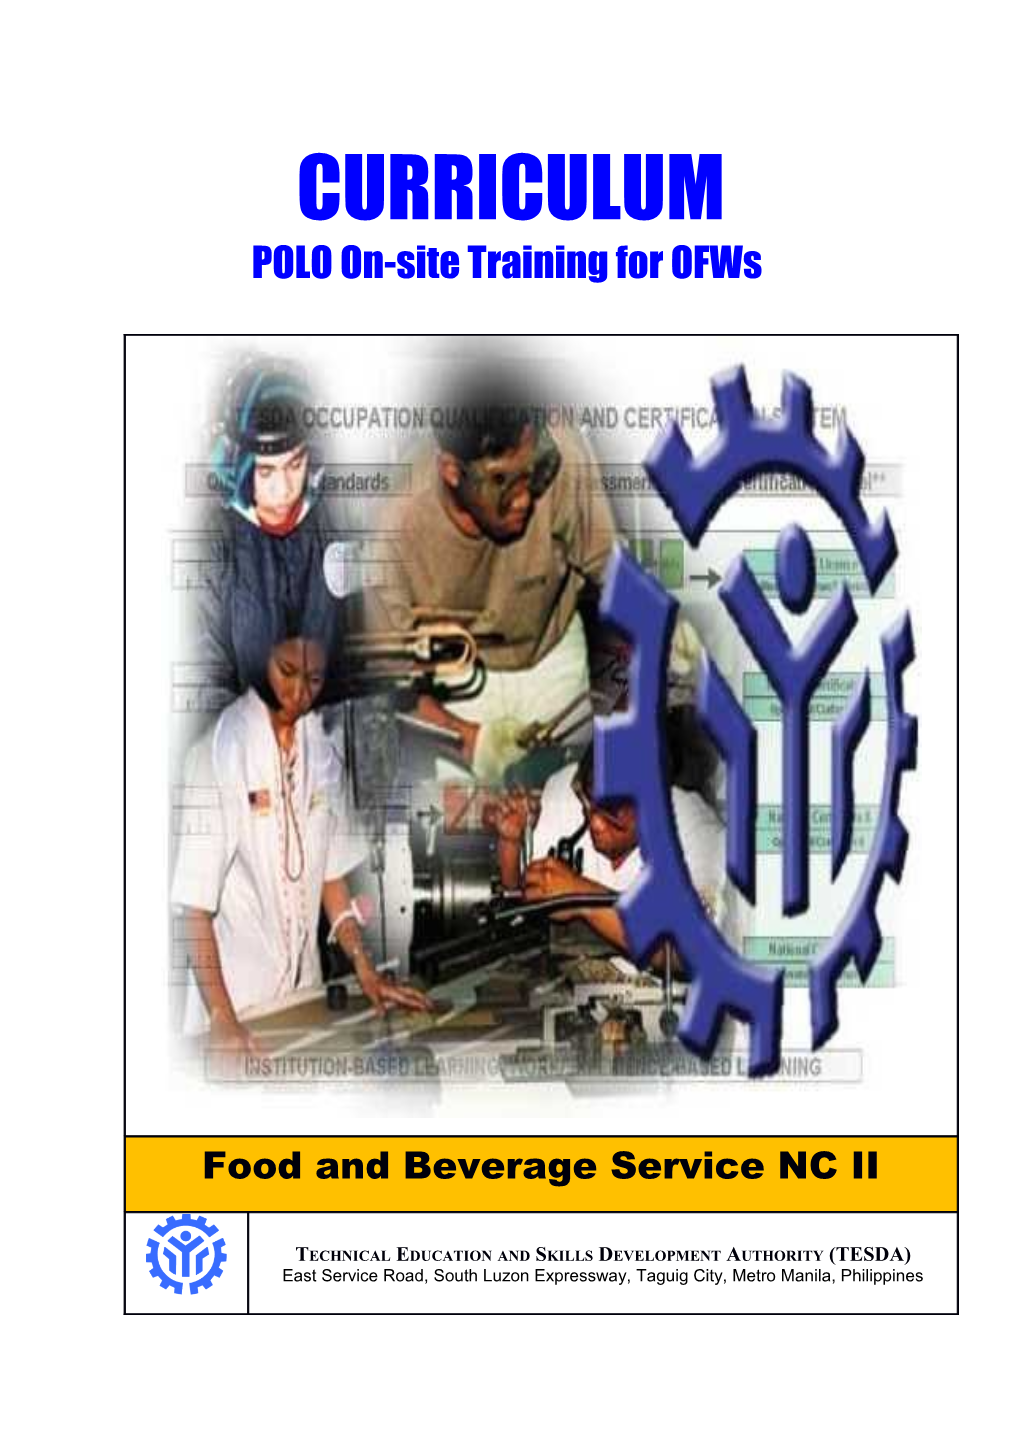 POLO On-Site Training for Ofws